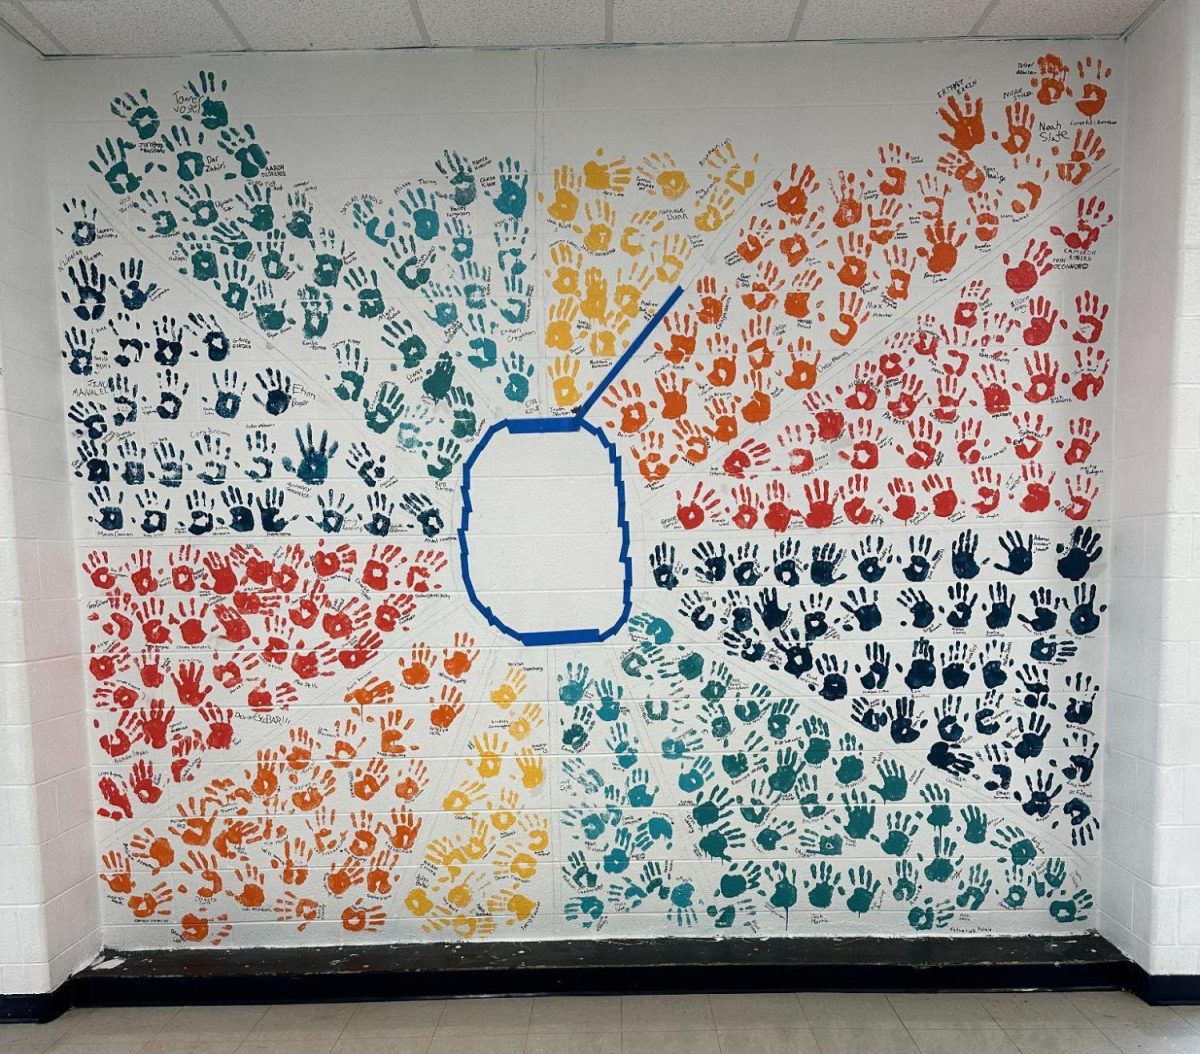 This year’s senior handprints are part of the class’ mural, which will be ‘70s themed in accordance with the 70th anniversary. The mural features bright colors in a tie-dye-esque swirl and will include other decade-appropriate designs.